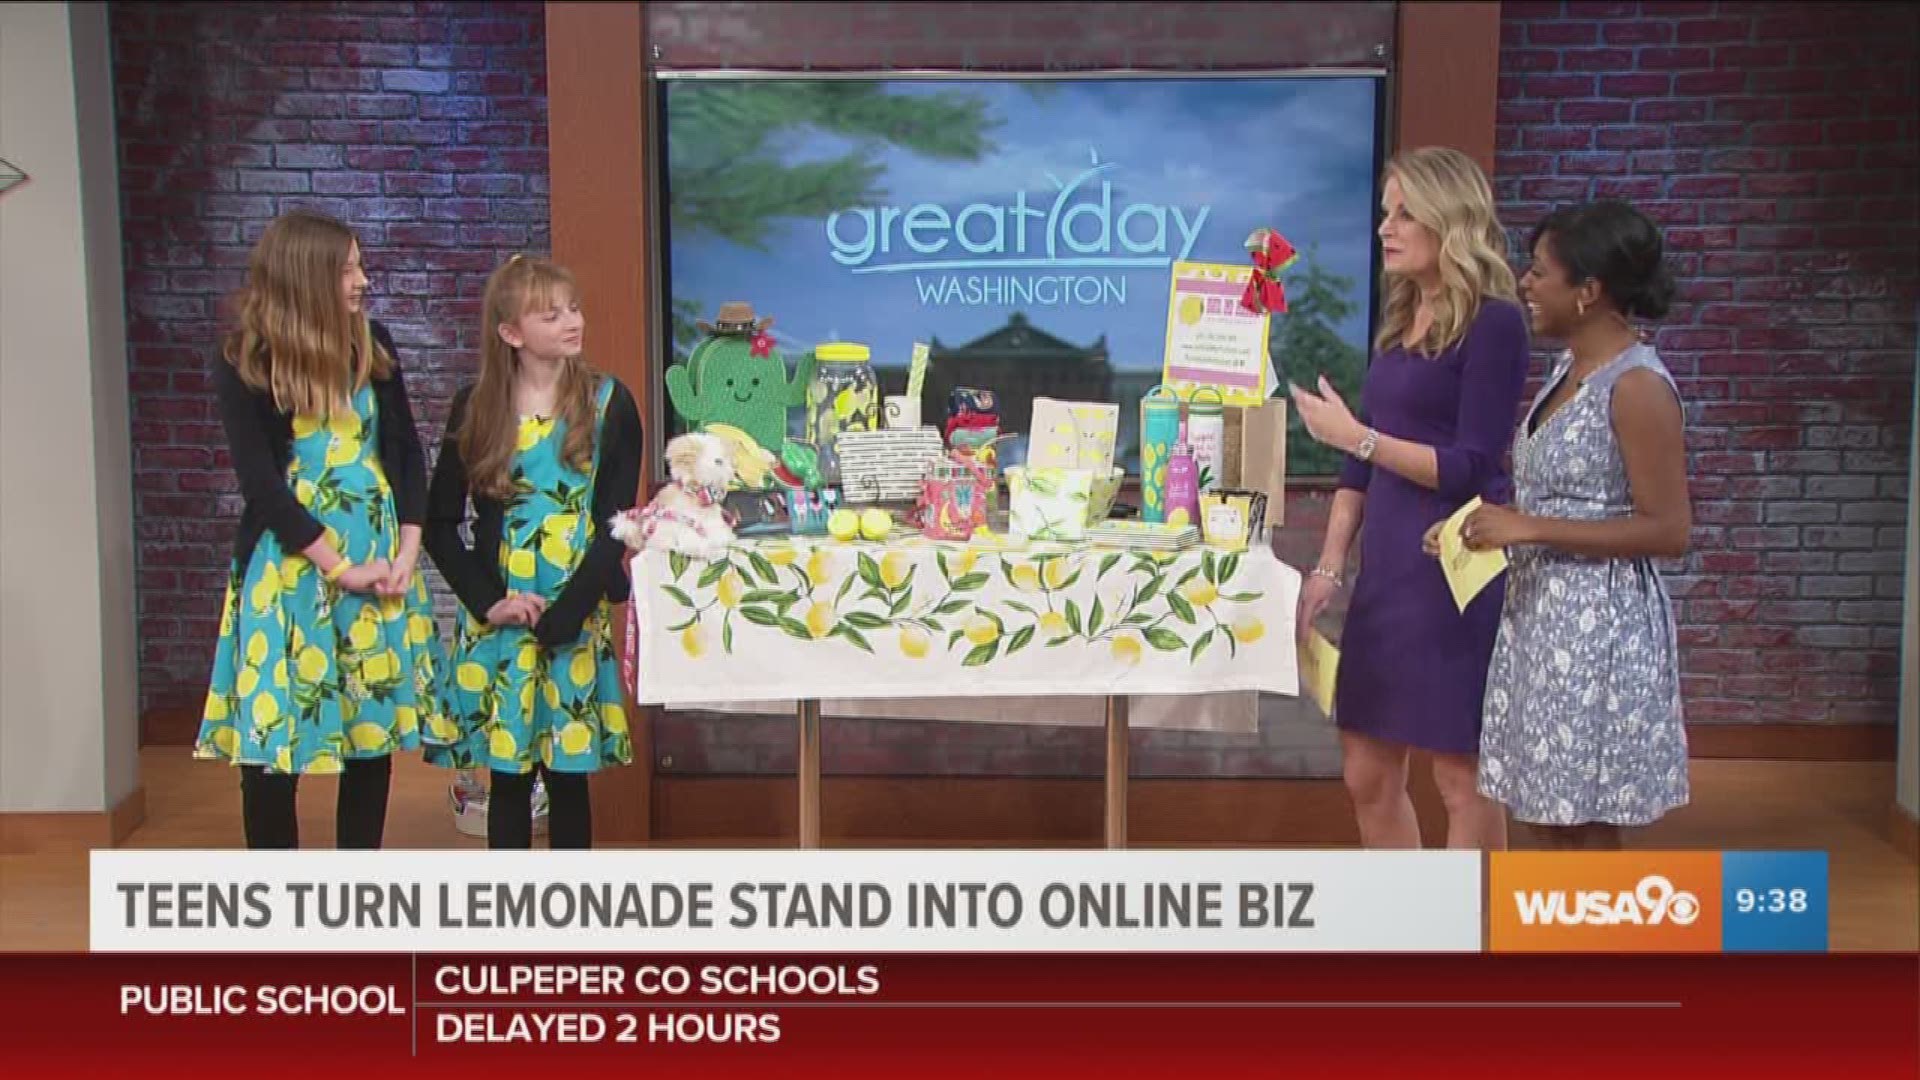 13 year old friends, Hailey Hertzman and Katie Vonder Haar, explain how "success is sweet" after going from a lemonade stand to starting their own online business called 'Ooh La Lemon'.